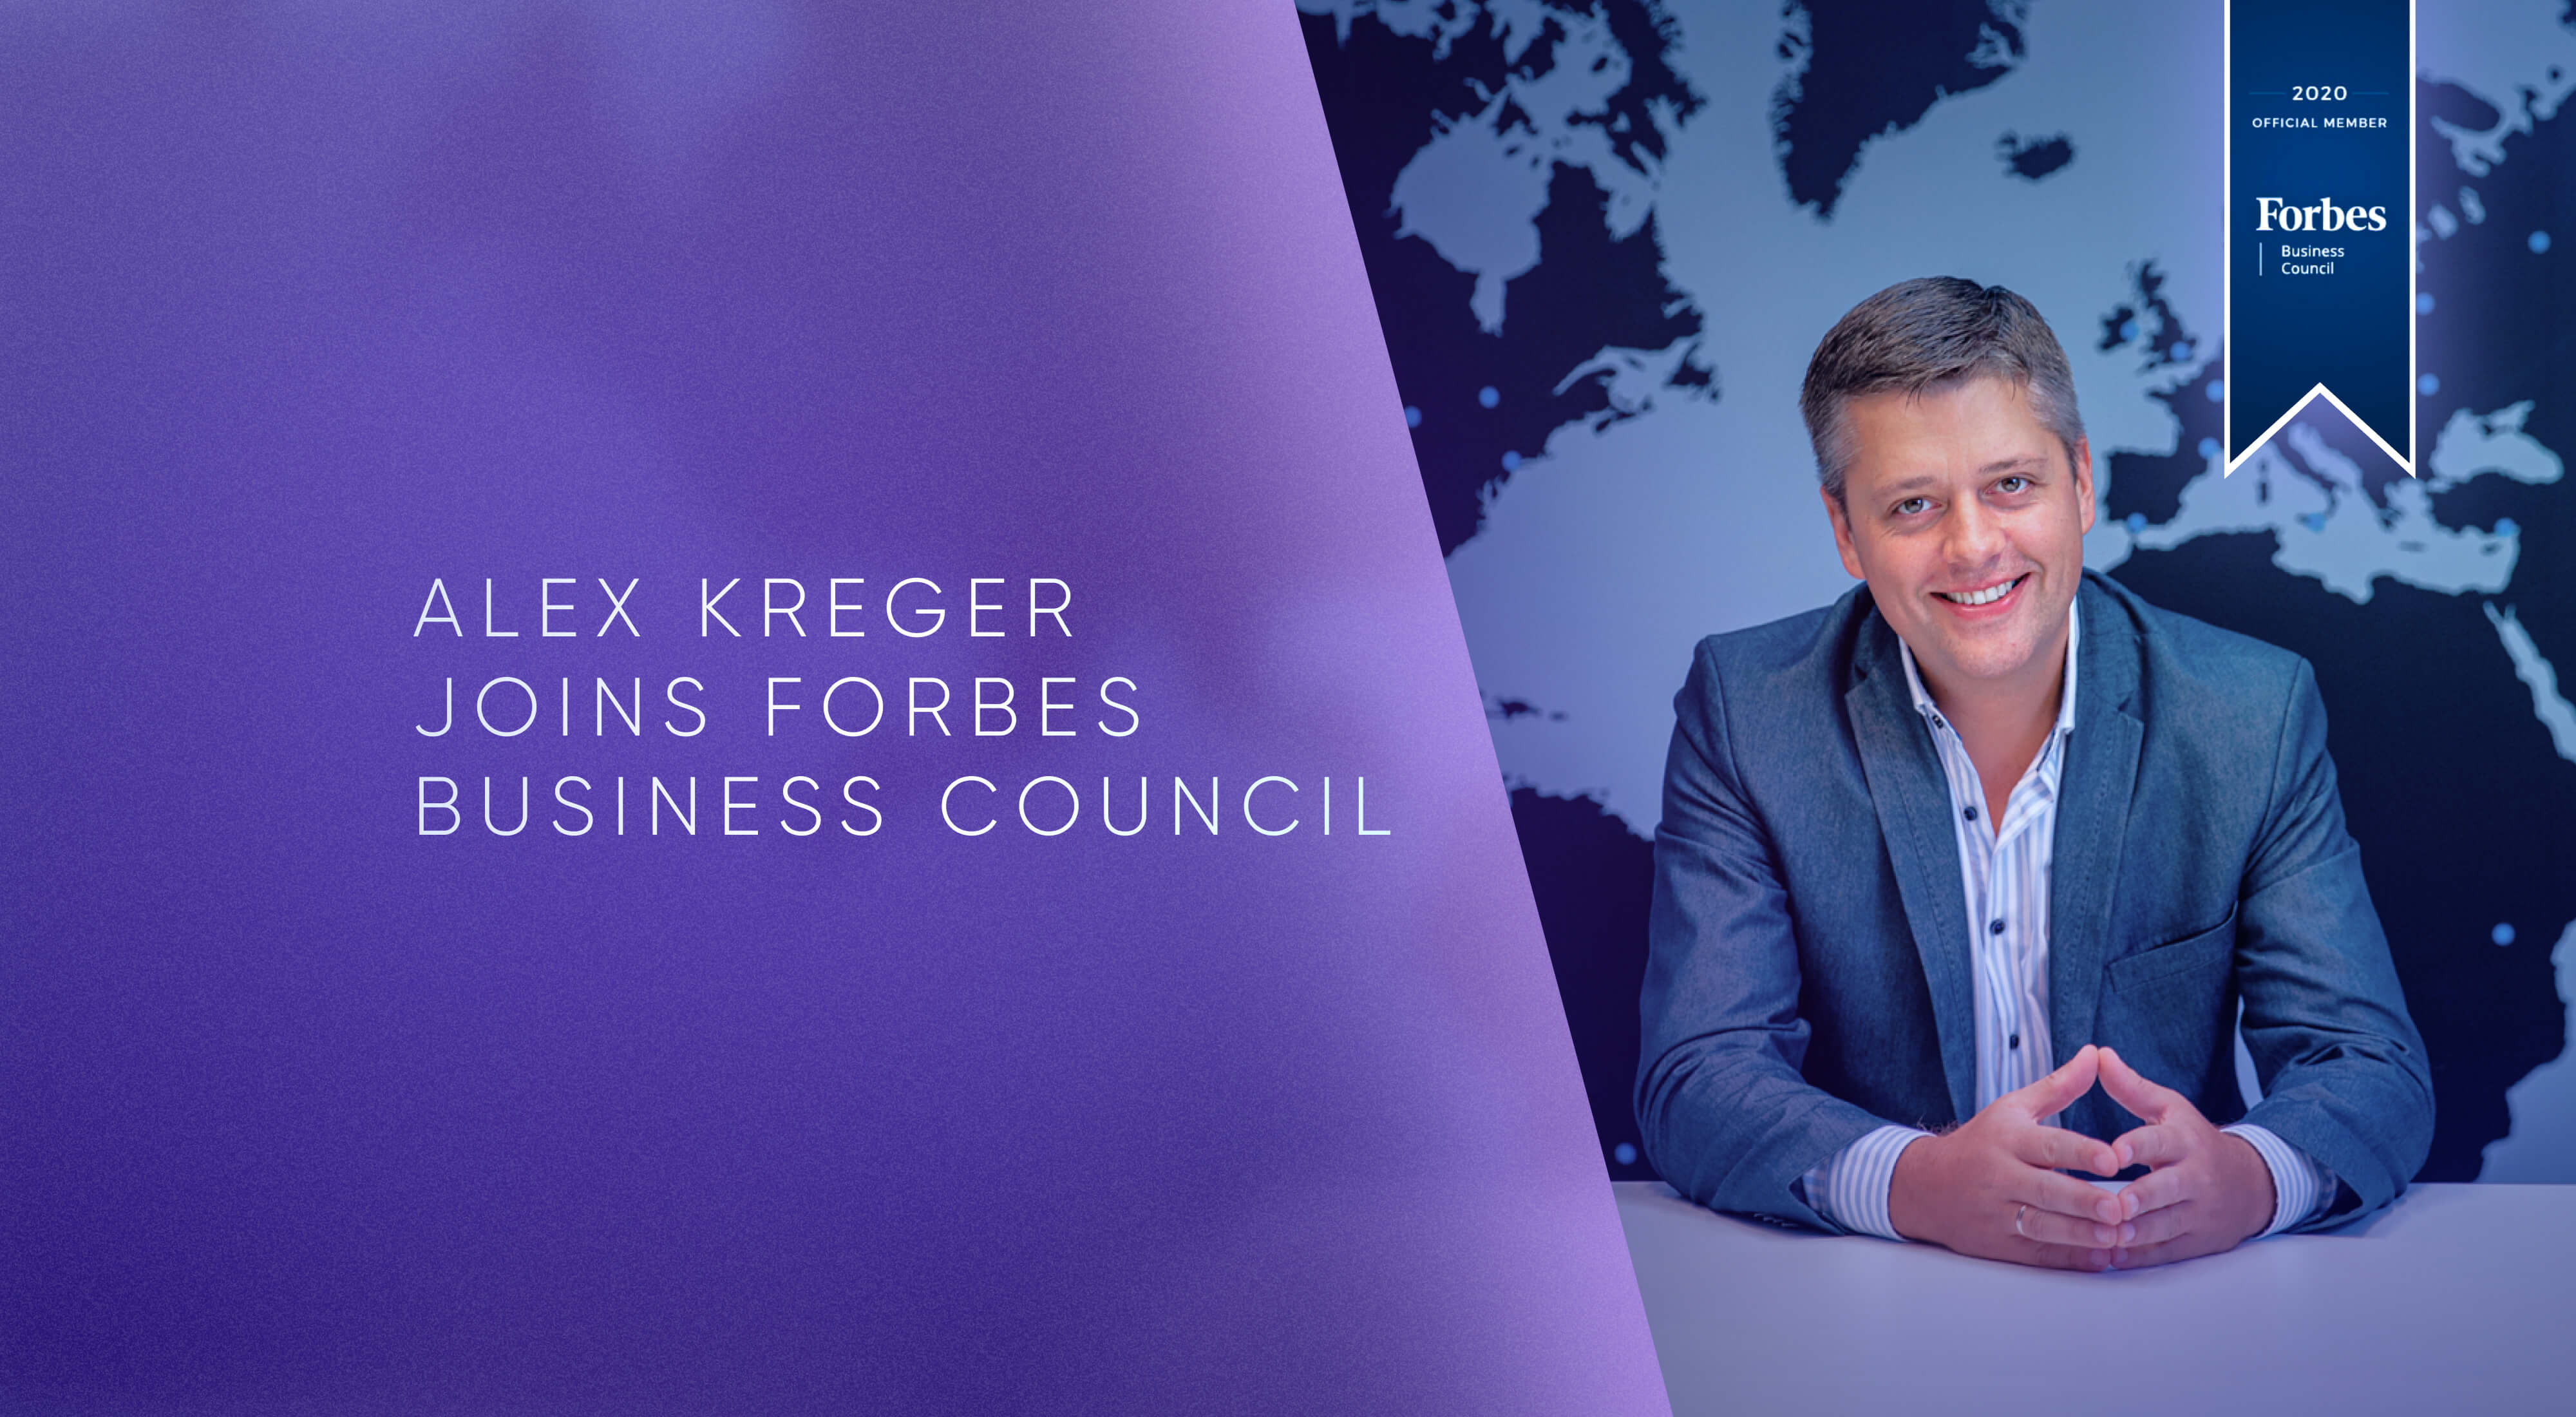 UXDA's Founder CEO Alex Kreger Becomes a Member of the Prestigious Forbes Business Council